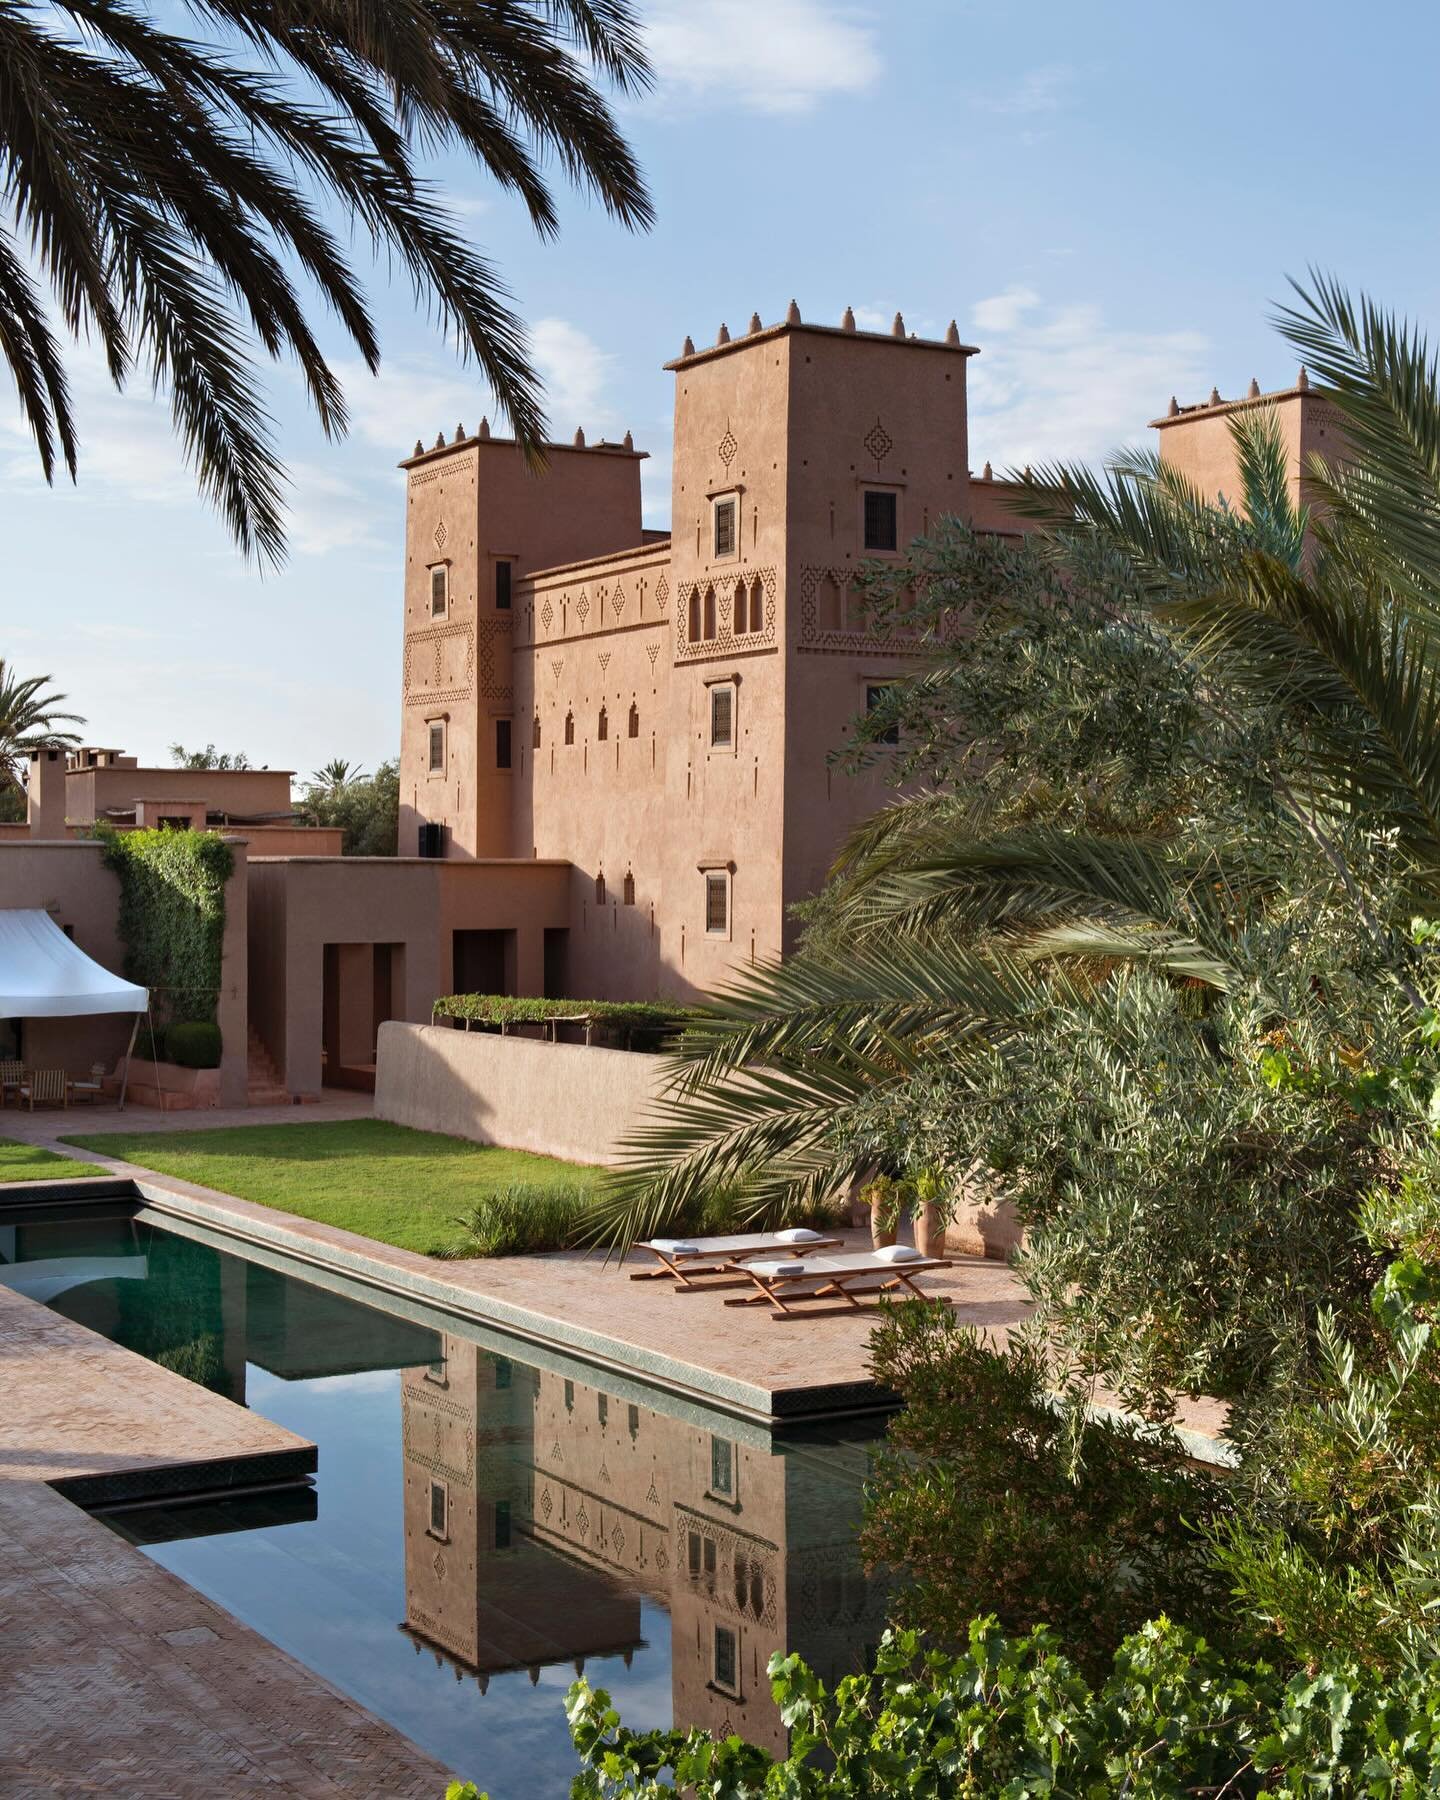 Dar Ahlam, known as &ldquo;The House of Dreams&rdquo; is a refurbished 200-year-old kasbah, located in the magical oasis of Skoura, Morocco. Surrounded by palm groves and almond trees, and overlooking the Atlas Mountains, the retreat is what we call 